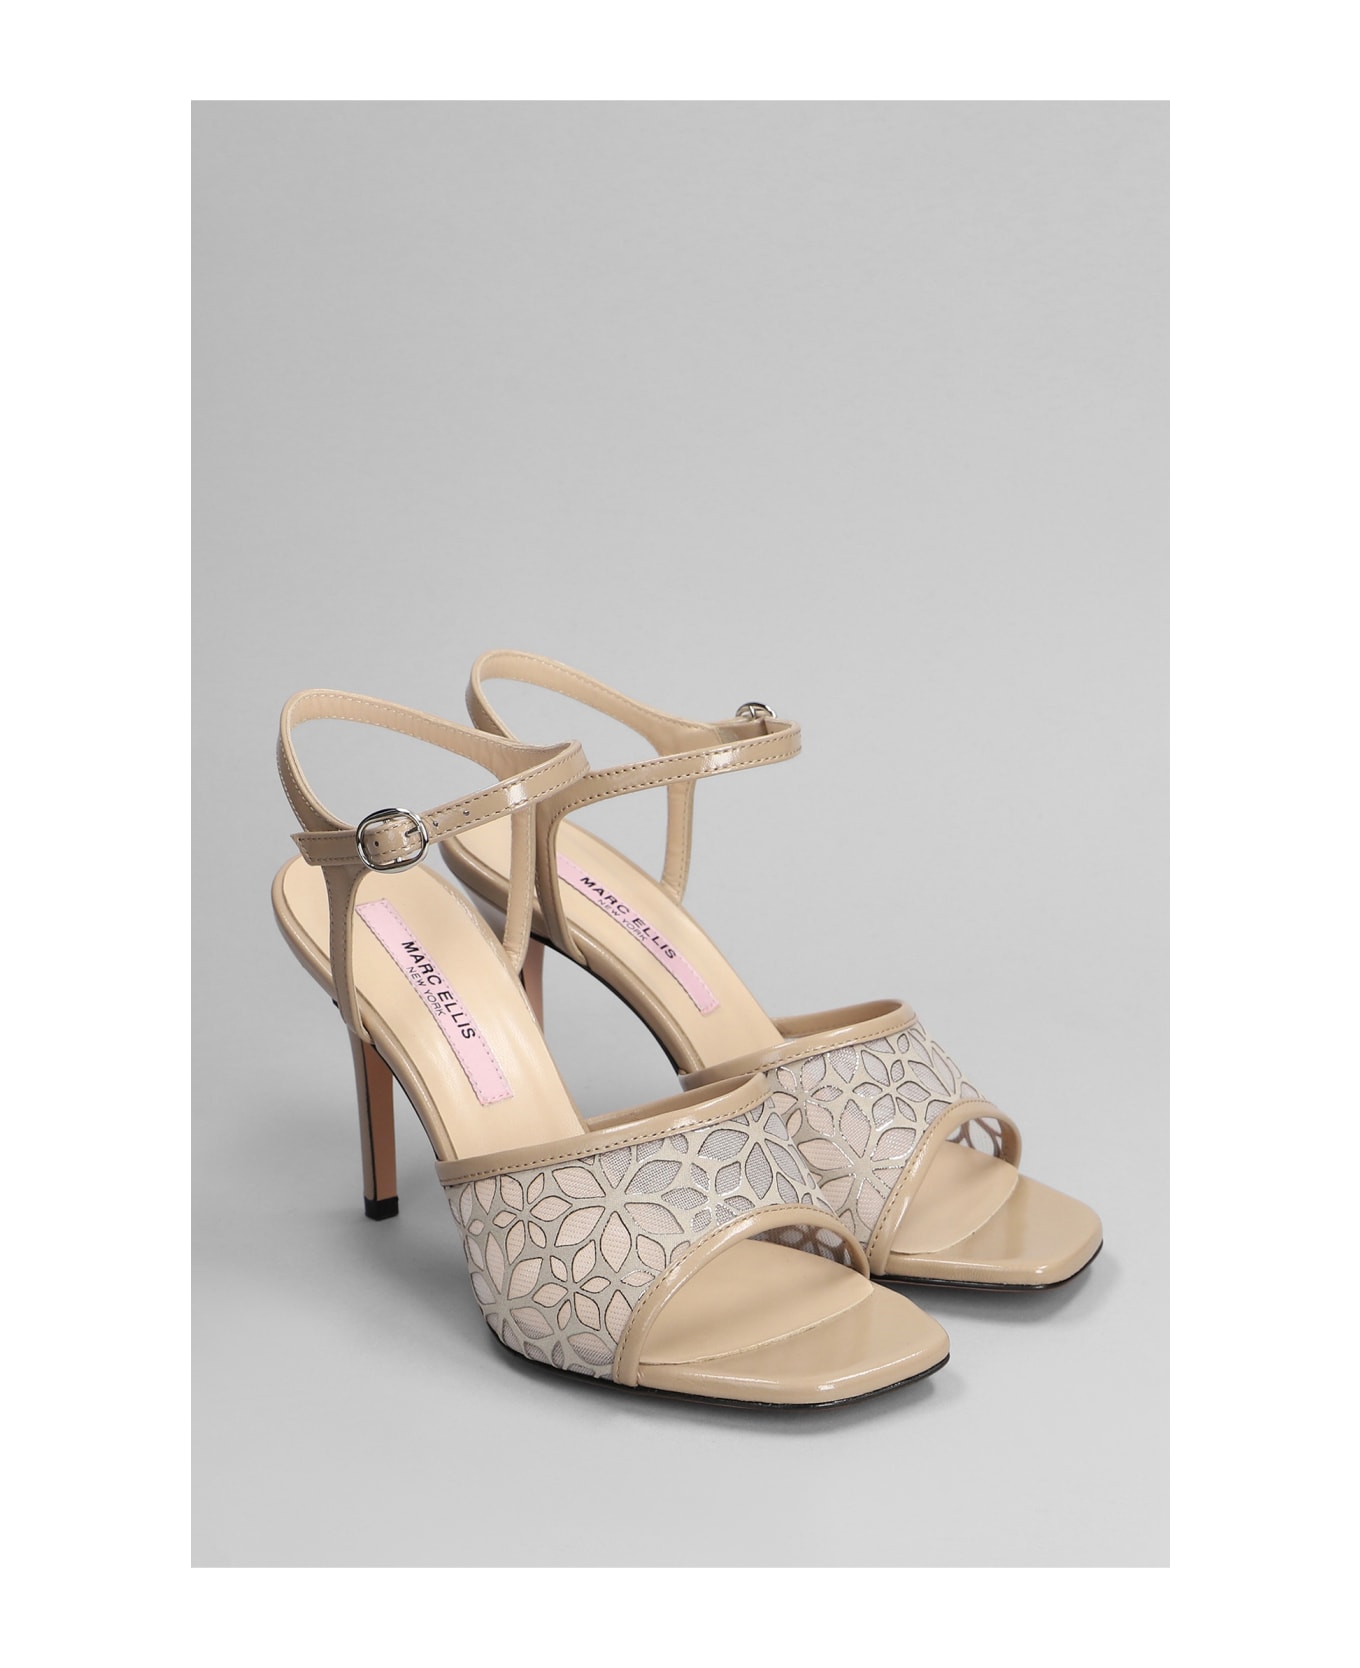 Marc Ellis Sandals In Taupe Patent Leather - taupe サンダル